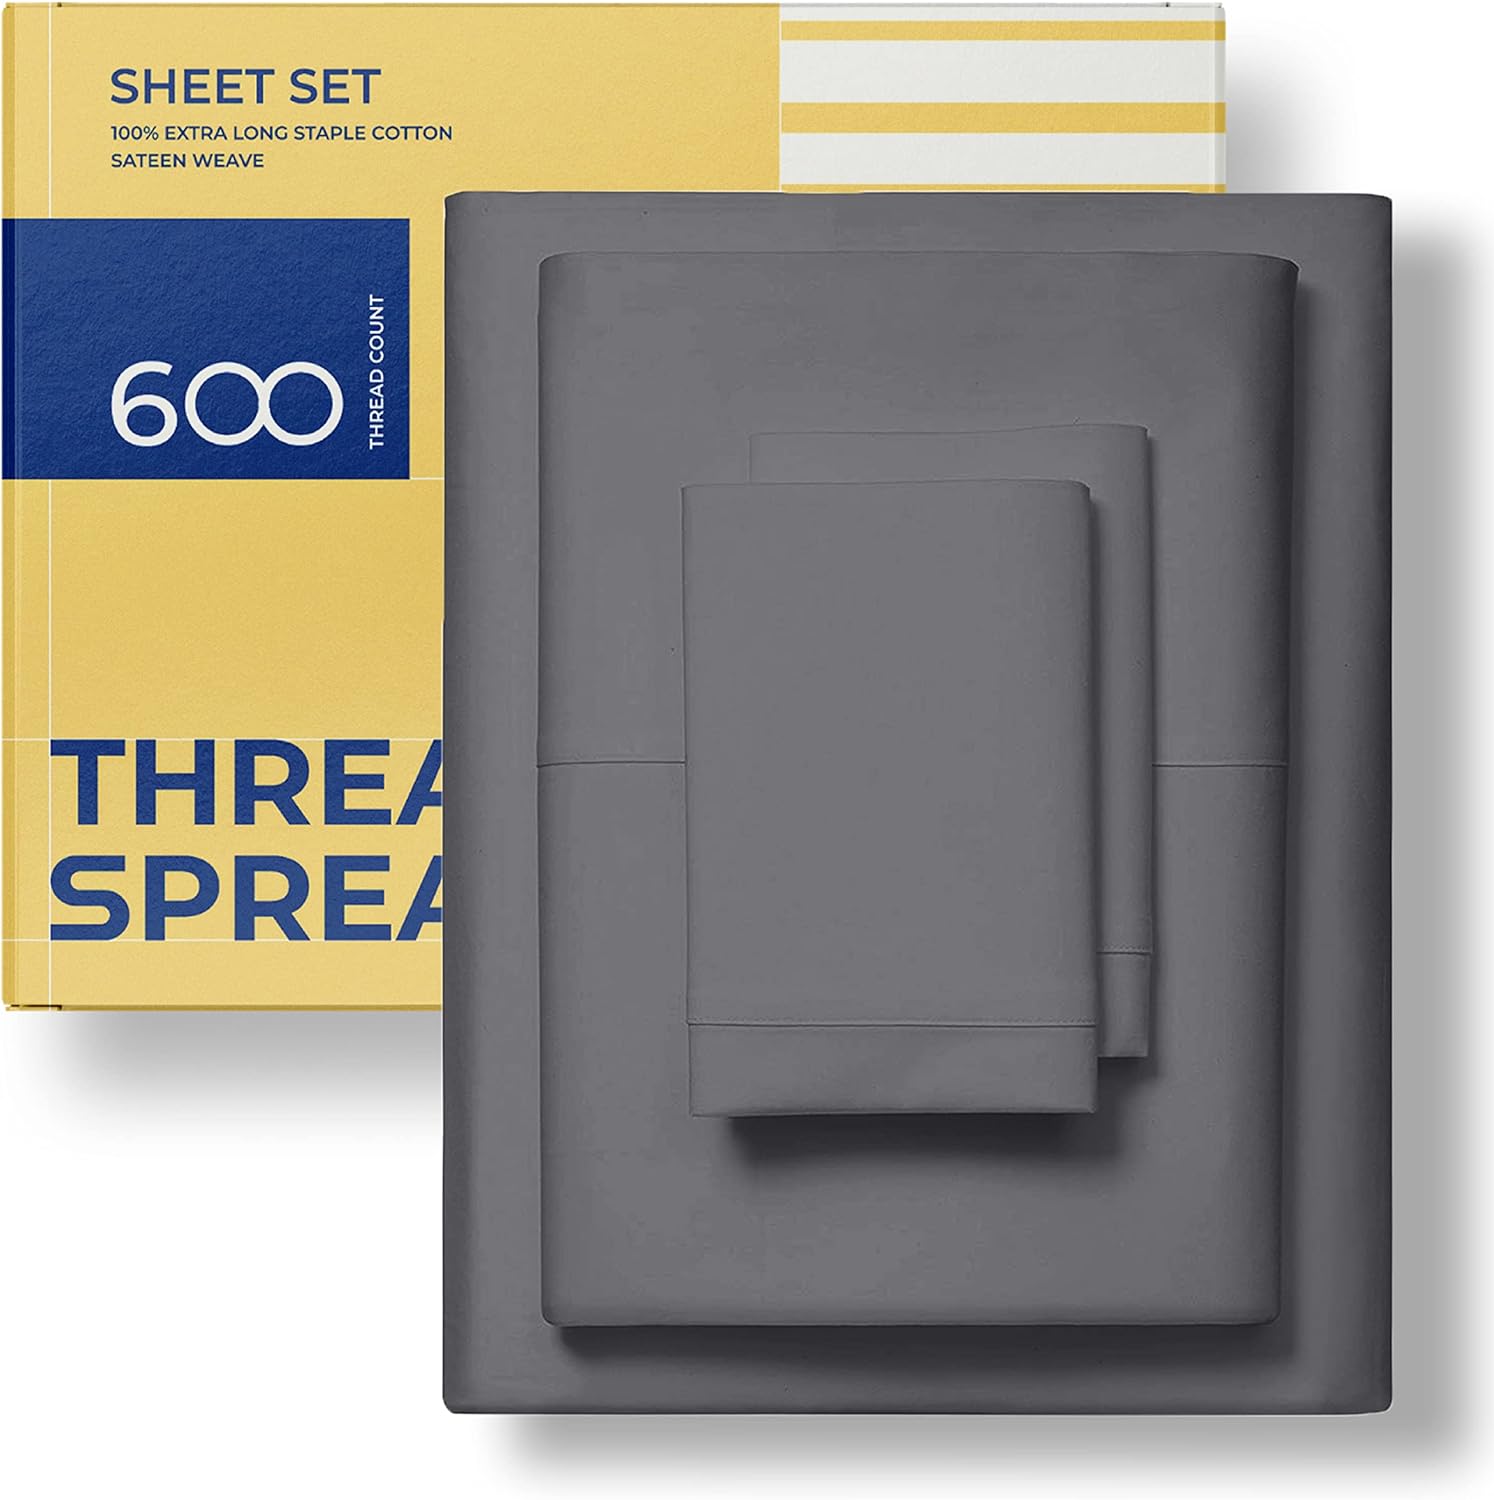 THREAD SPREAD Luxury Sheets 600 Thread Count - Egyptian Cotton Quality Twin Size Sheet Set - Deep Pocket Fitted Bedding Sheets & Pillowcases - 3 Pc Breathable - Dark Grey Sheets for Boys & Girls